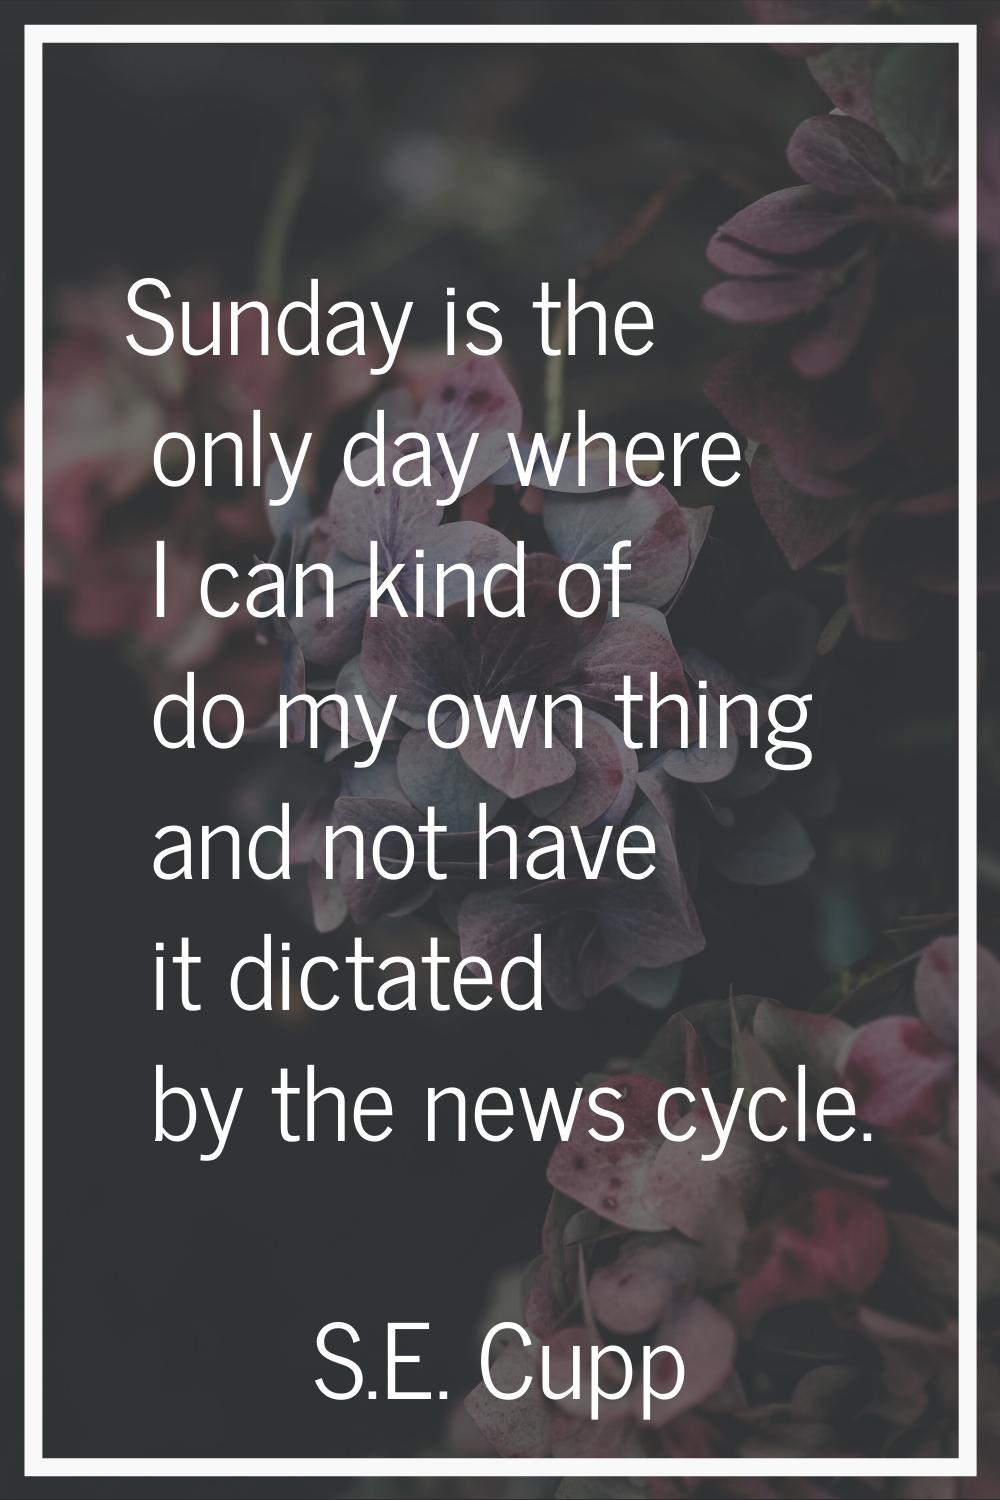 Sunday is the only day where I can kind of do my own thing and not have it dictated by the news cyc